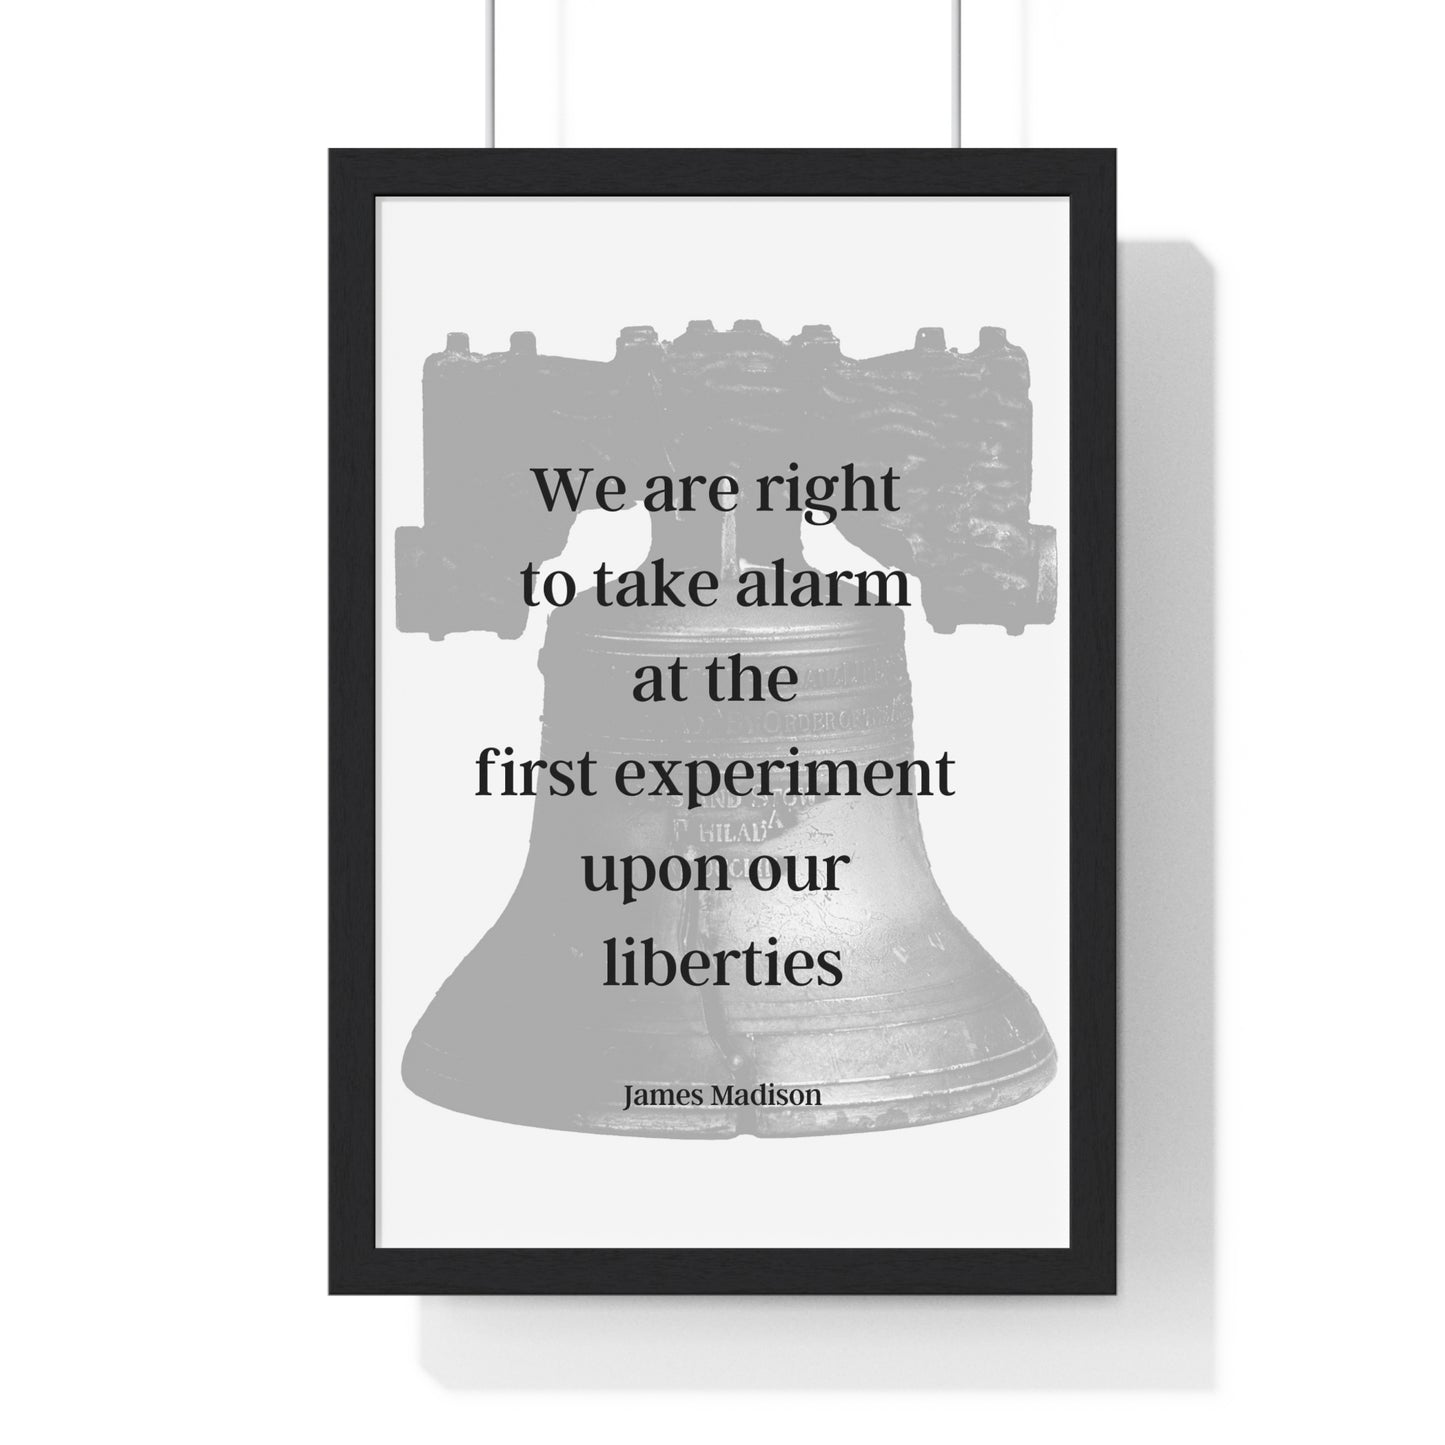 James Madison Quote 4, Poster Art, Light Print, 4th President of the United States, American Patriots, Liberty Bell, Freedom, Justice, Political Art, Poster Prints, Presidential Quotes, Inspirational Quotes